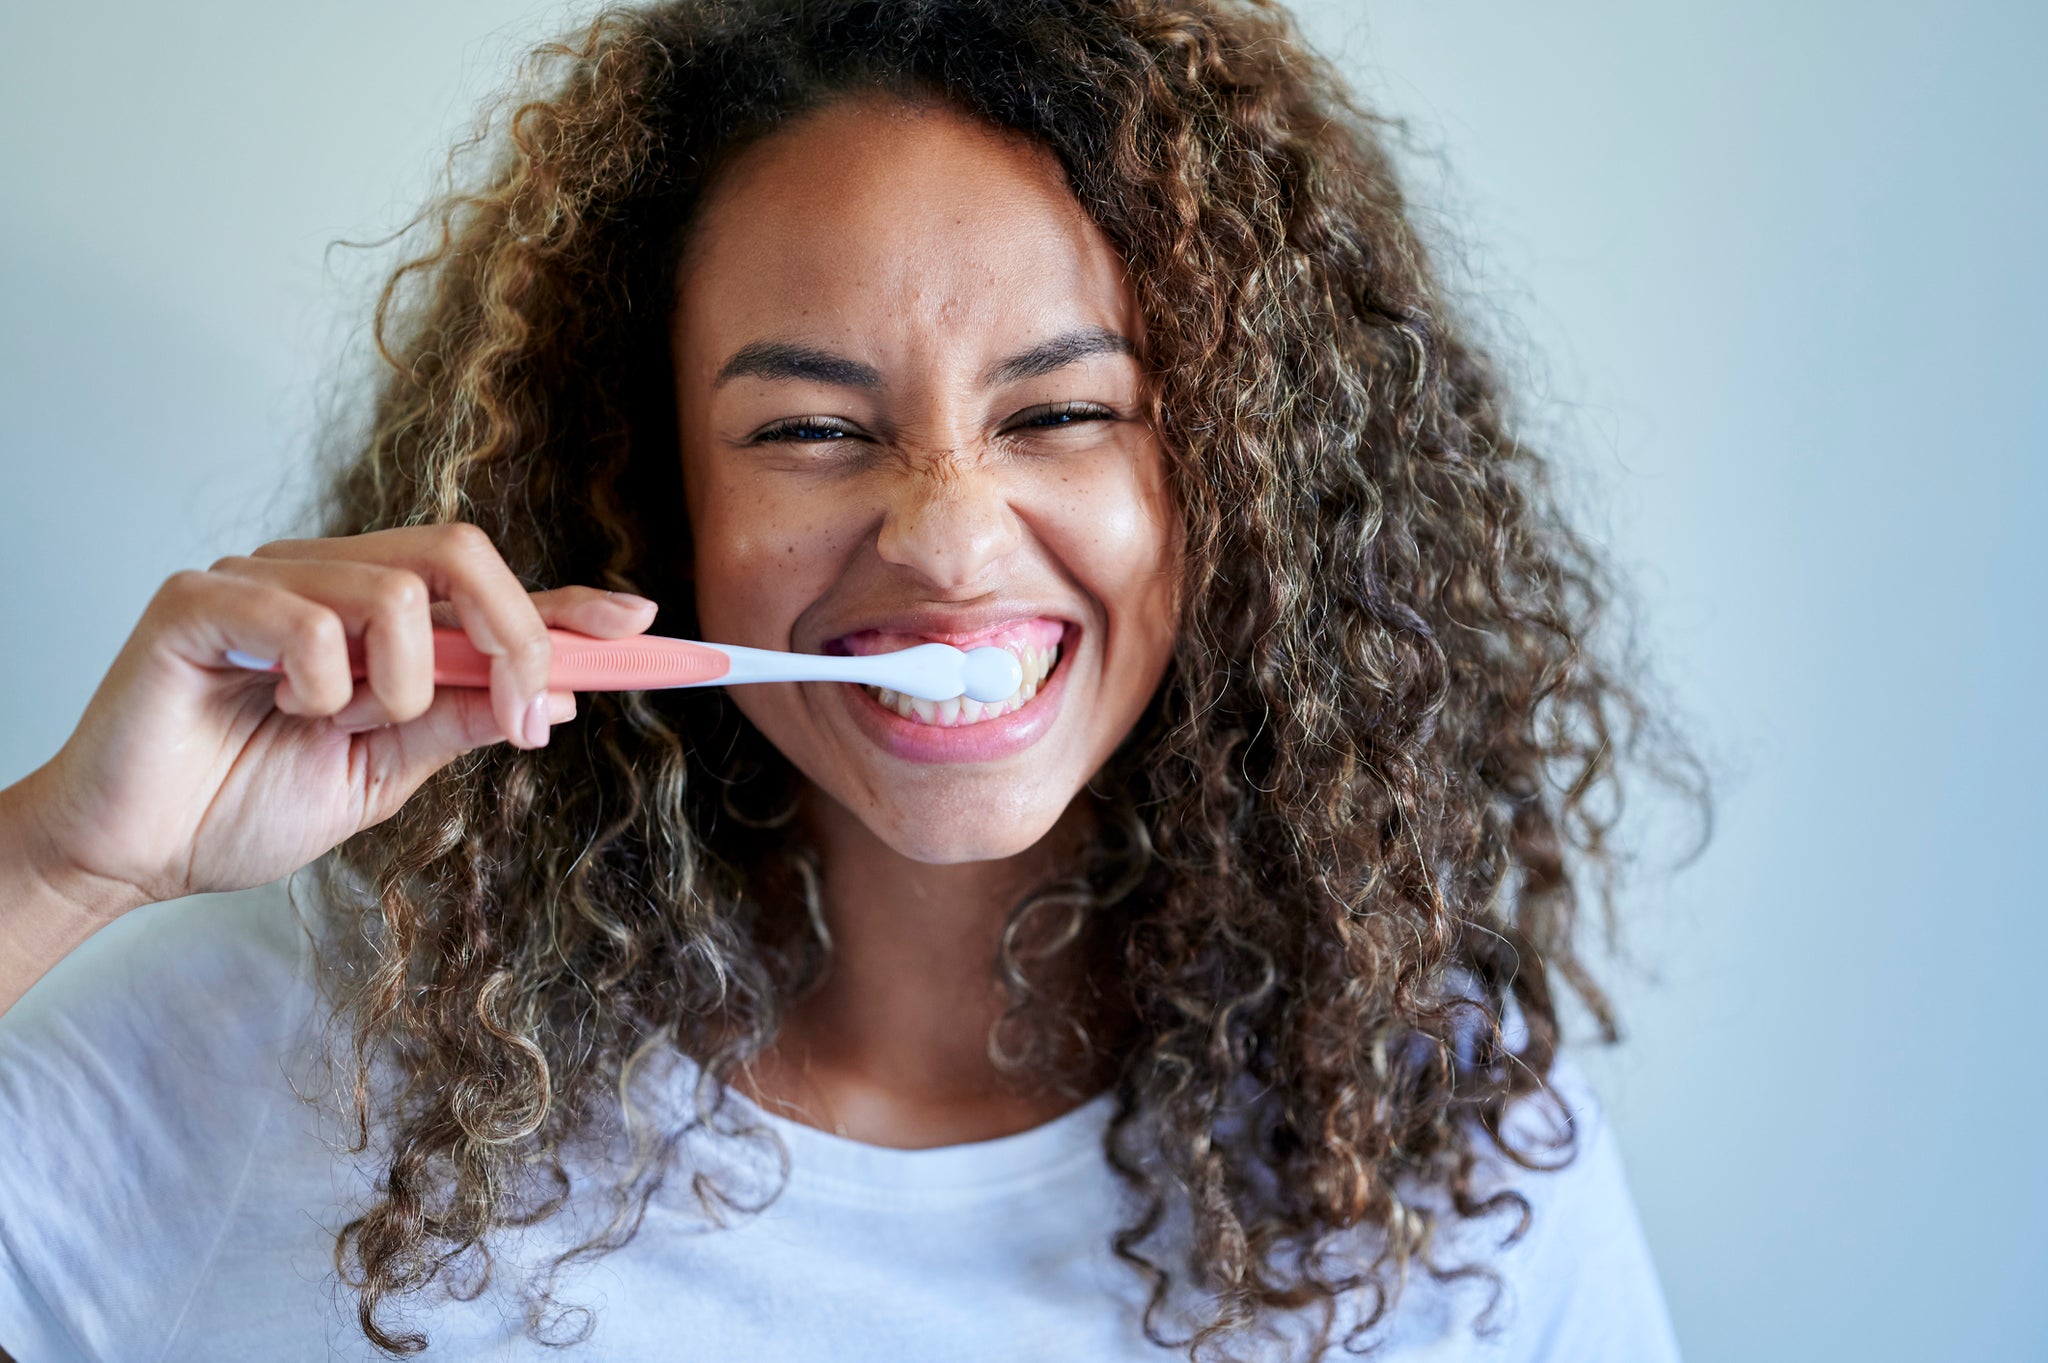 A Brief History of the Toothbrush